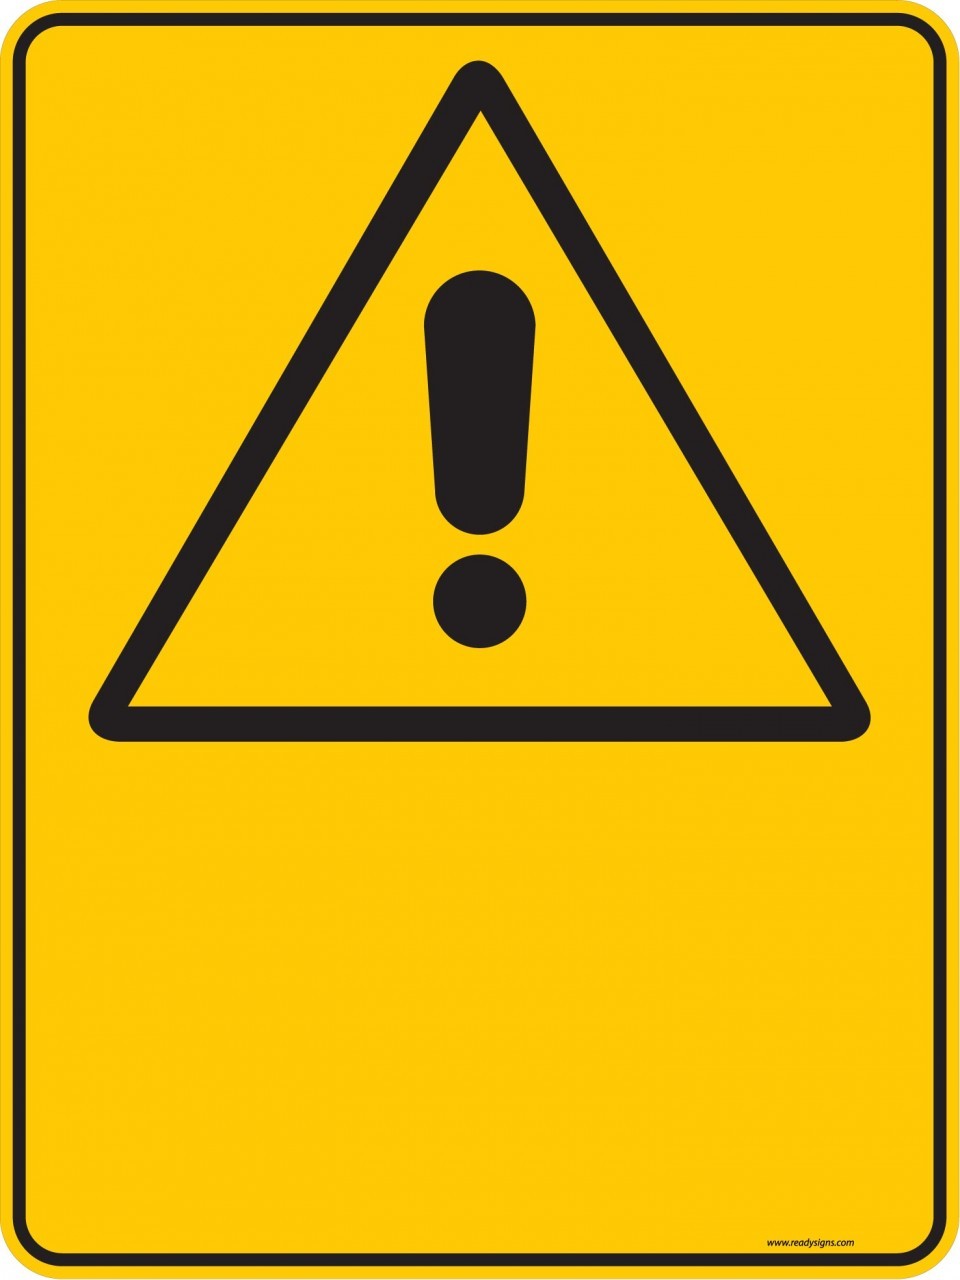 Warning Sign - BLANK Sign - PICTOGRAM - Ready Signs